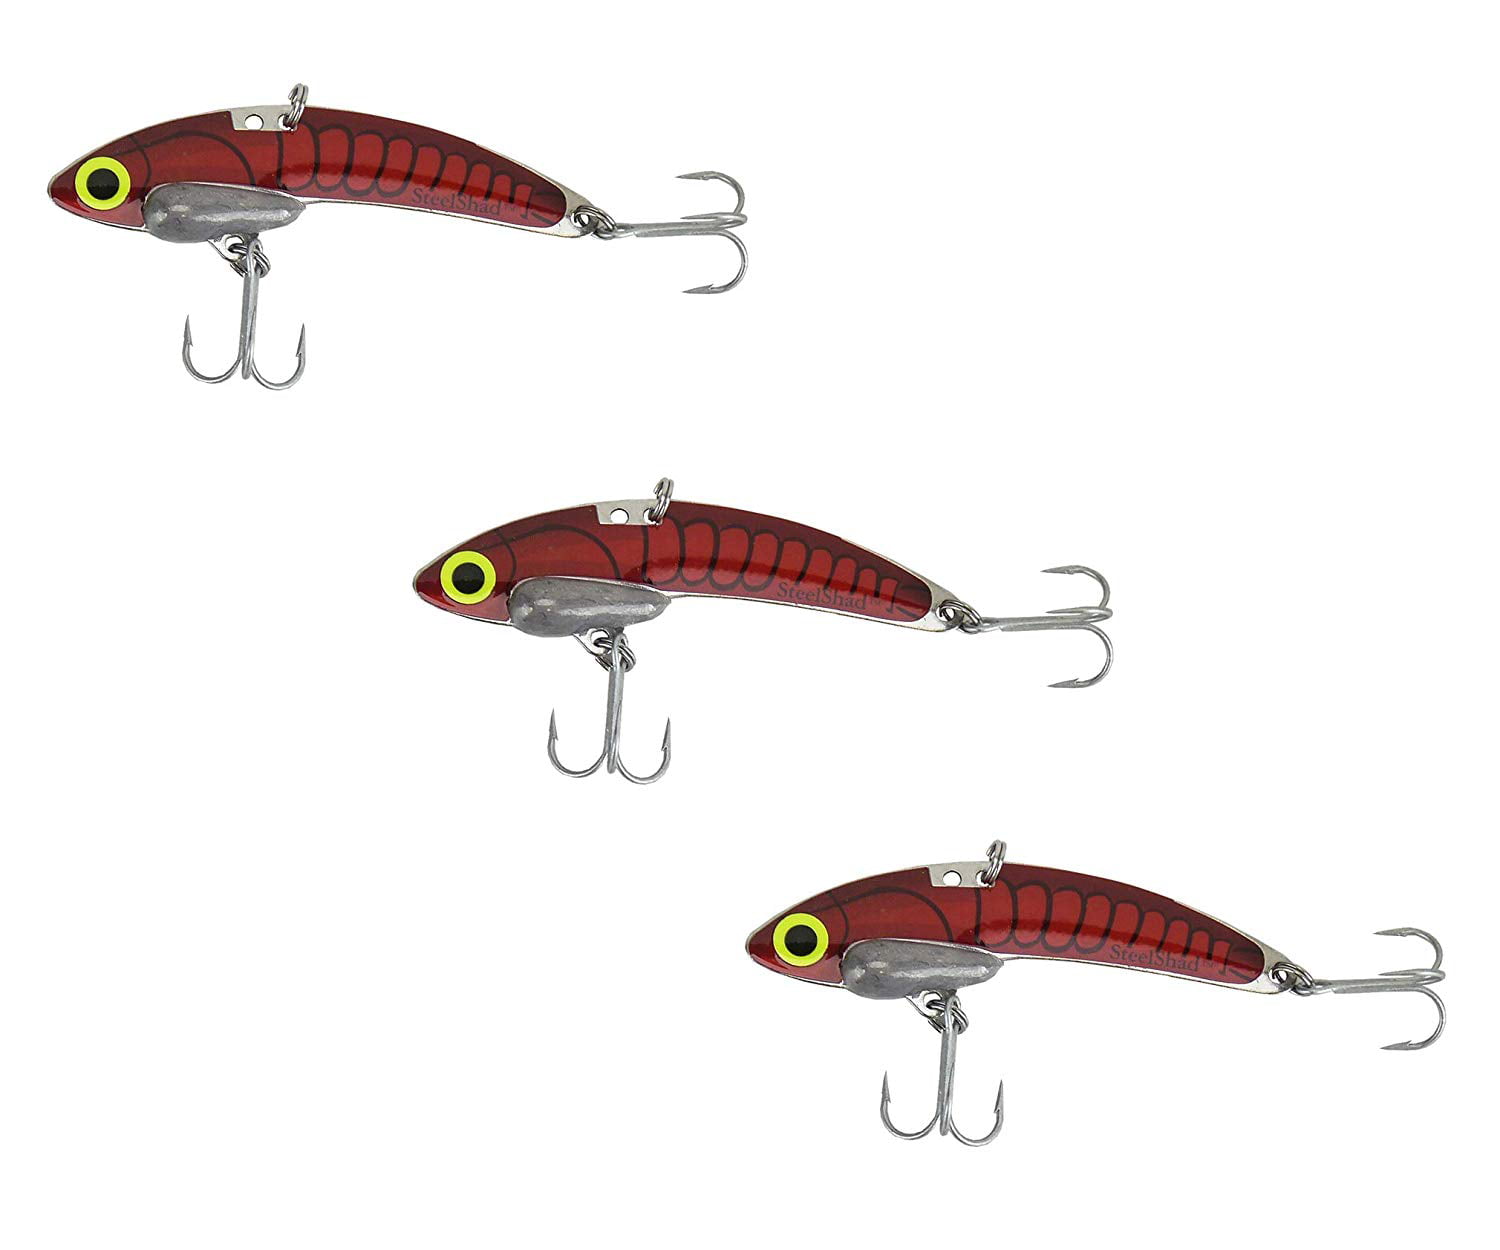 Salmon and Striper 3/4 oz Lipless Crankbait for Freshwater & Saltwater Fishing Long Casting Bass Lure Perfect for Bass - 2 Pack Pike Trout Musky XL Series SteelShad Walleye 